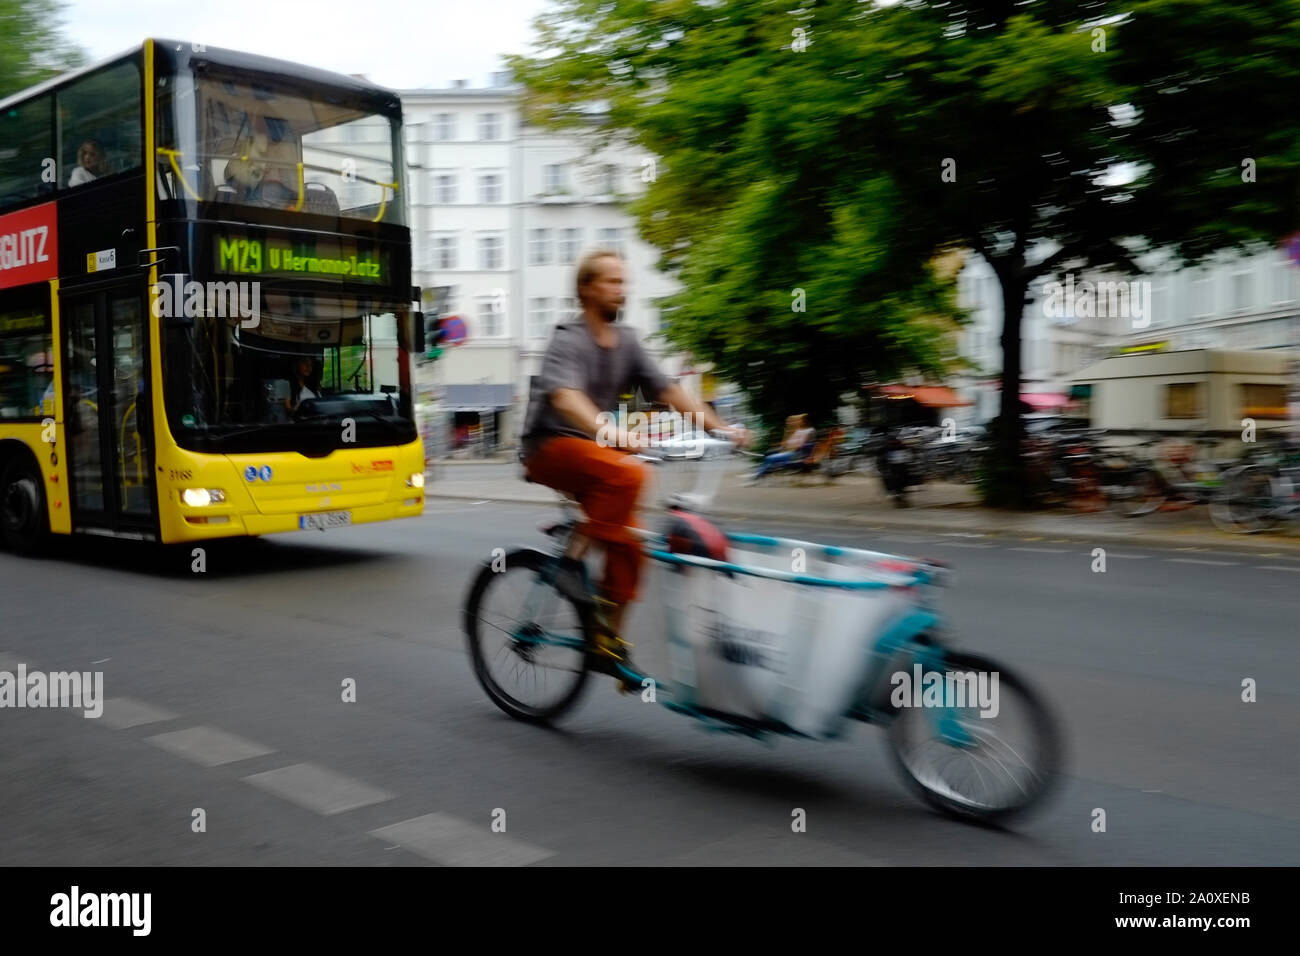 Berlin, Germany. 11th July, 2019. A young man rides a freight bike in front of a bus line M29 across Heinrichplatz in the district of Kreuzberg. Credit: Stefan Jaitner/dpa/Alamy Live News Stock Photo